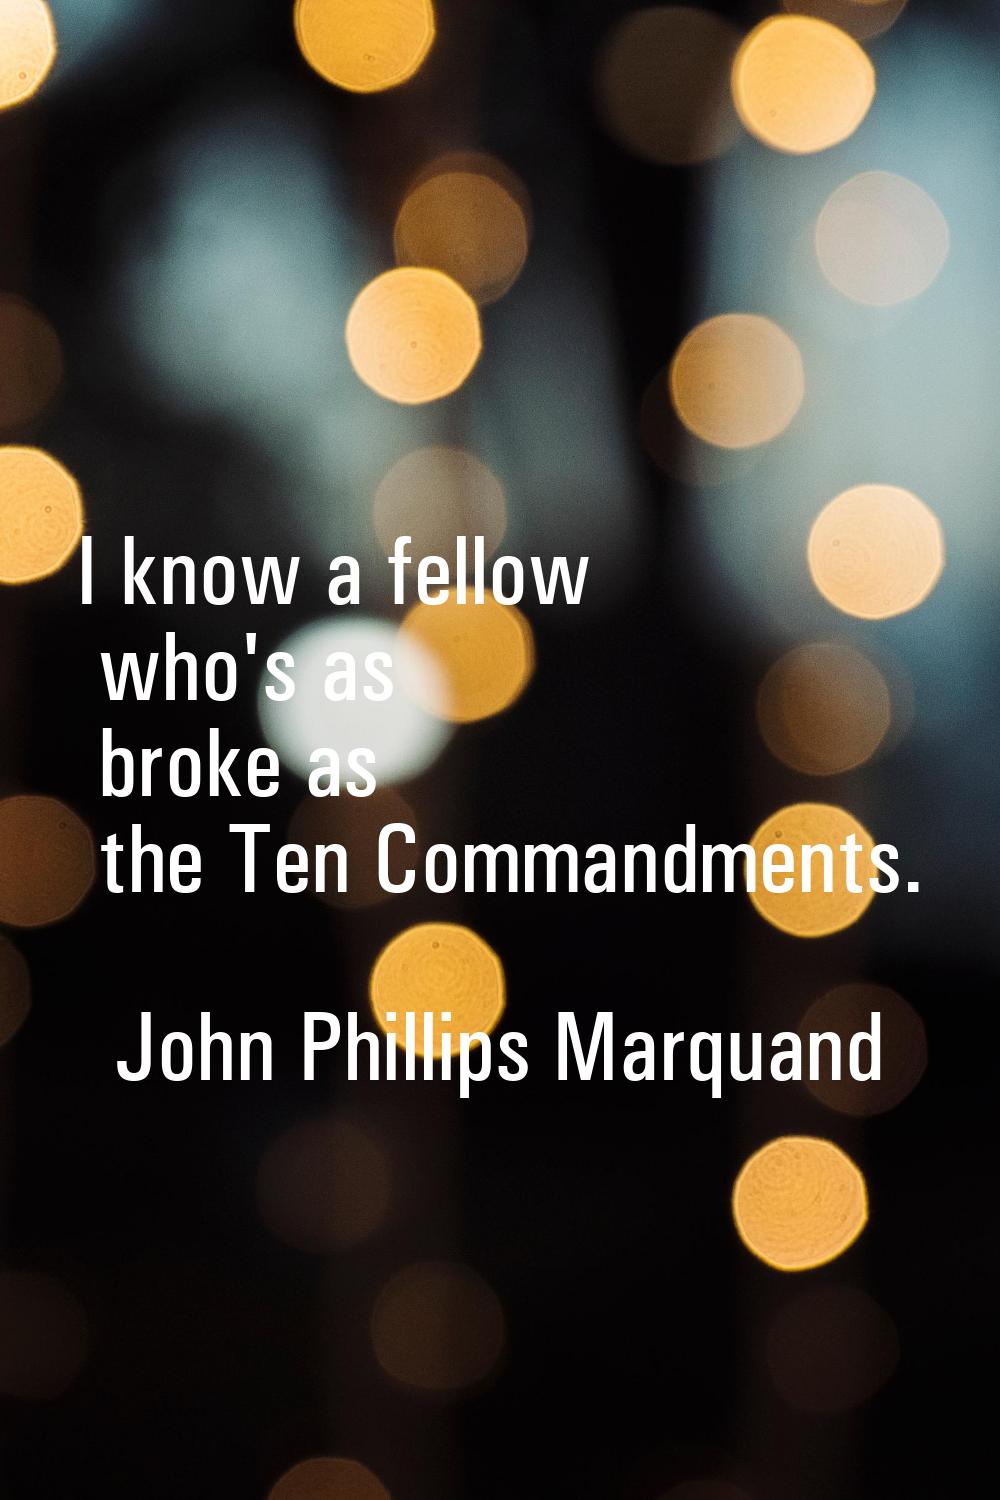 I know a fellow who's as broke as the Ten Commandments.